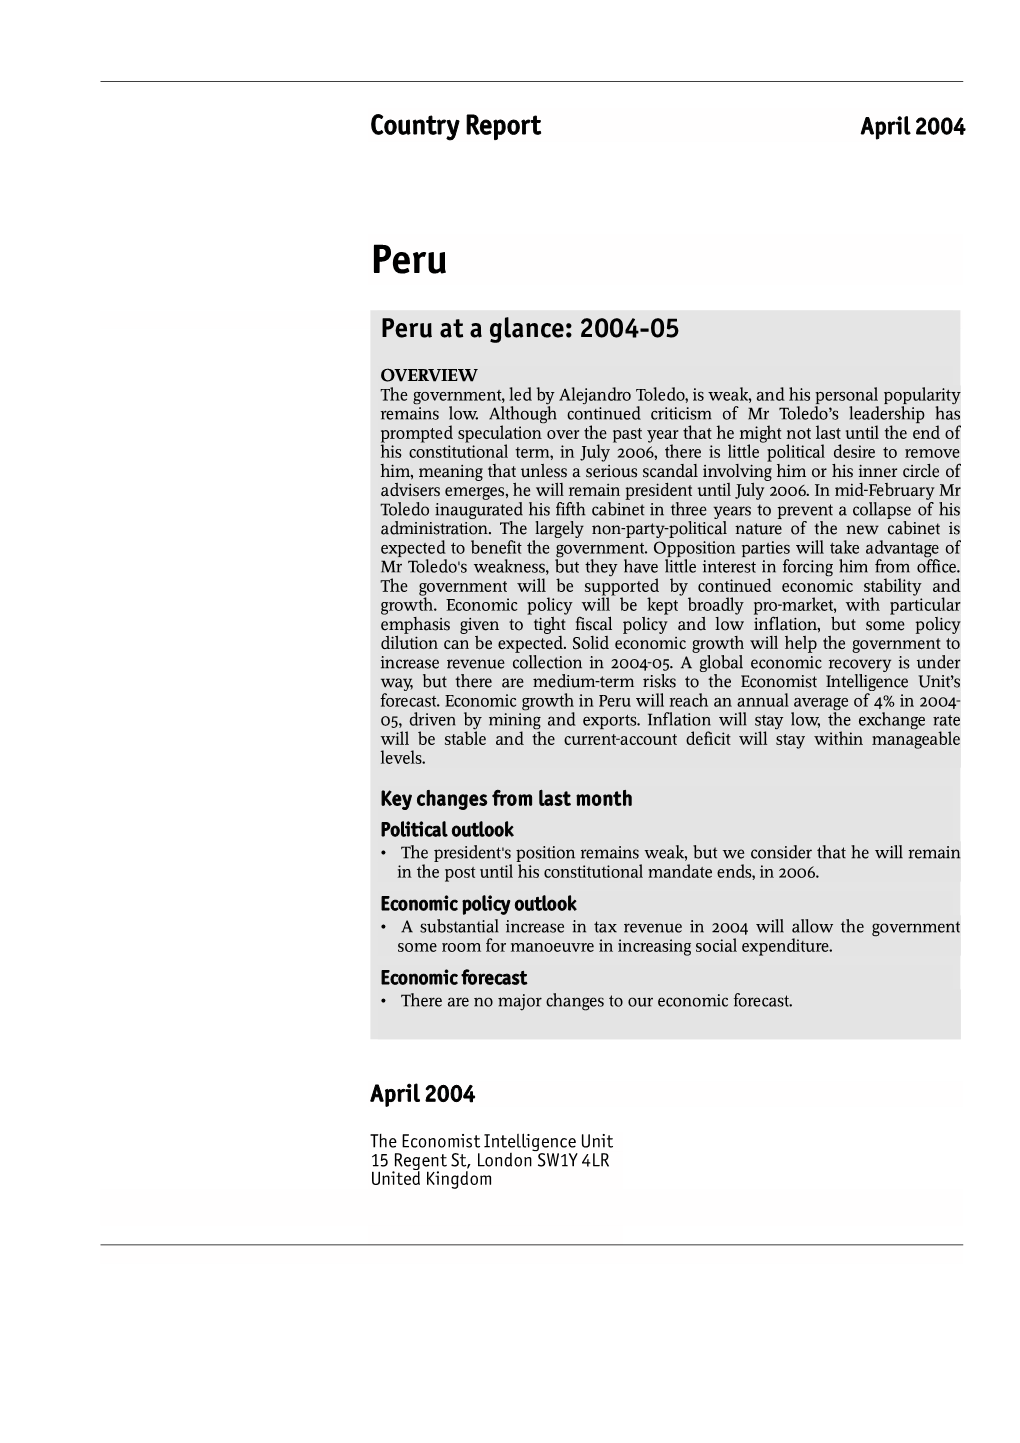 Country Report Peru at a Glance: 2004-05